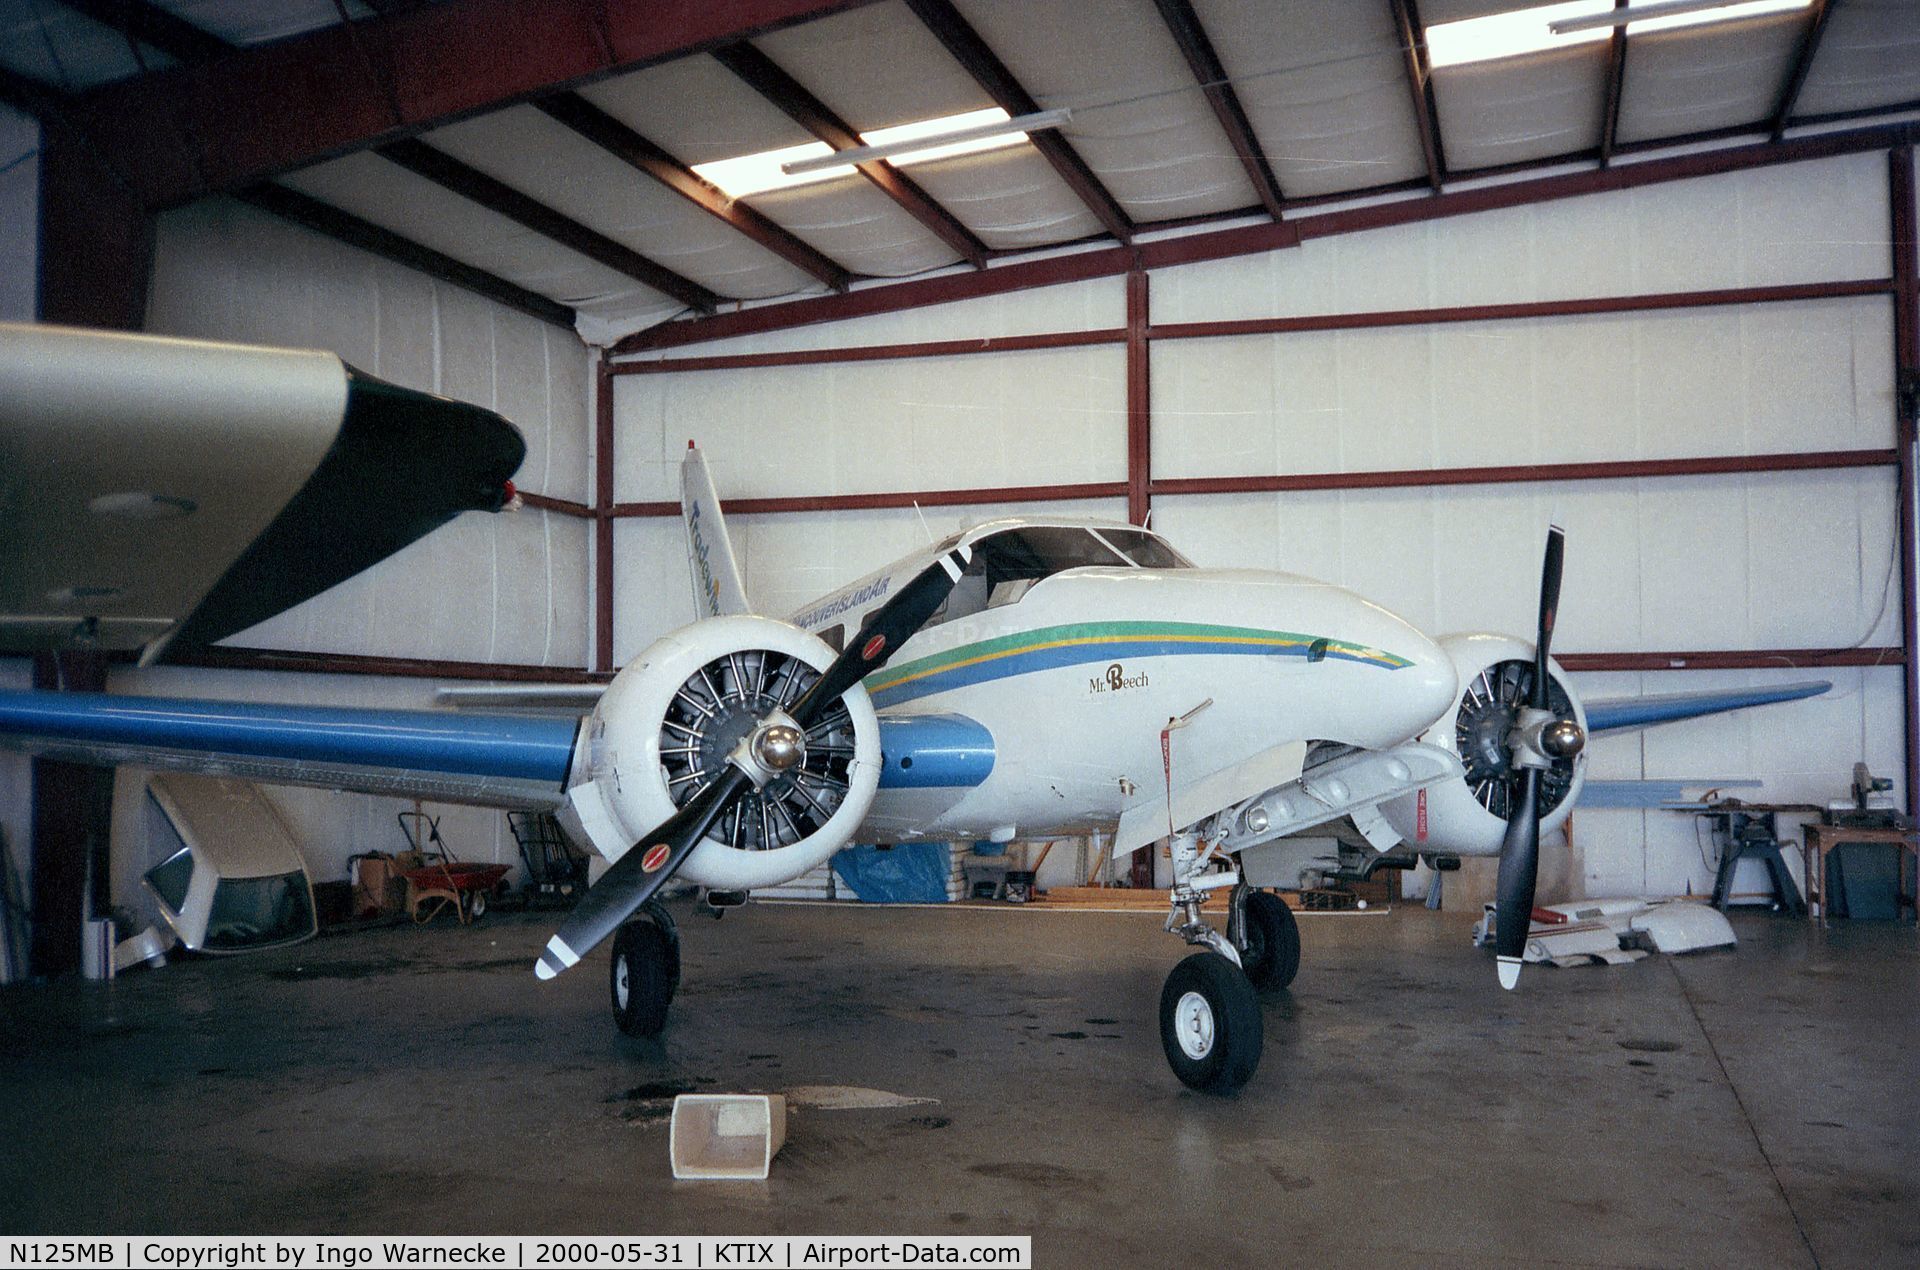 N125MB, 1952 Beech C-45H Expeditor C/N AF-286, Beechcraft C-45H Tradewind Conversion at Titusville airfield